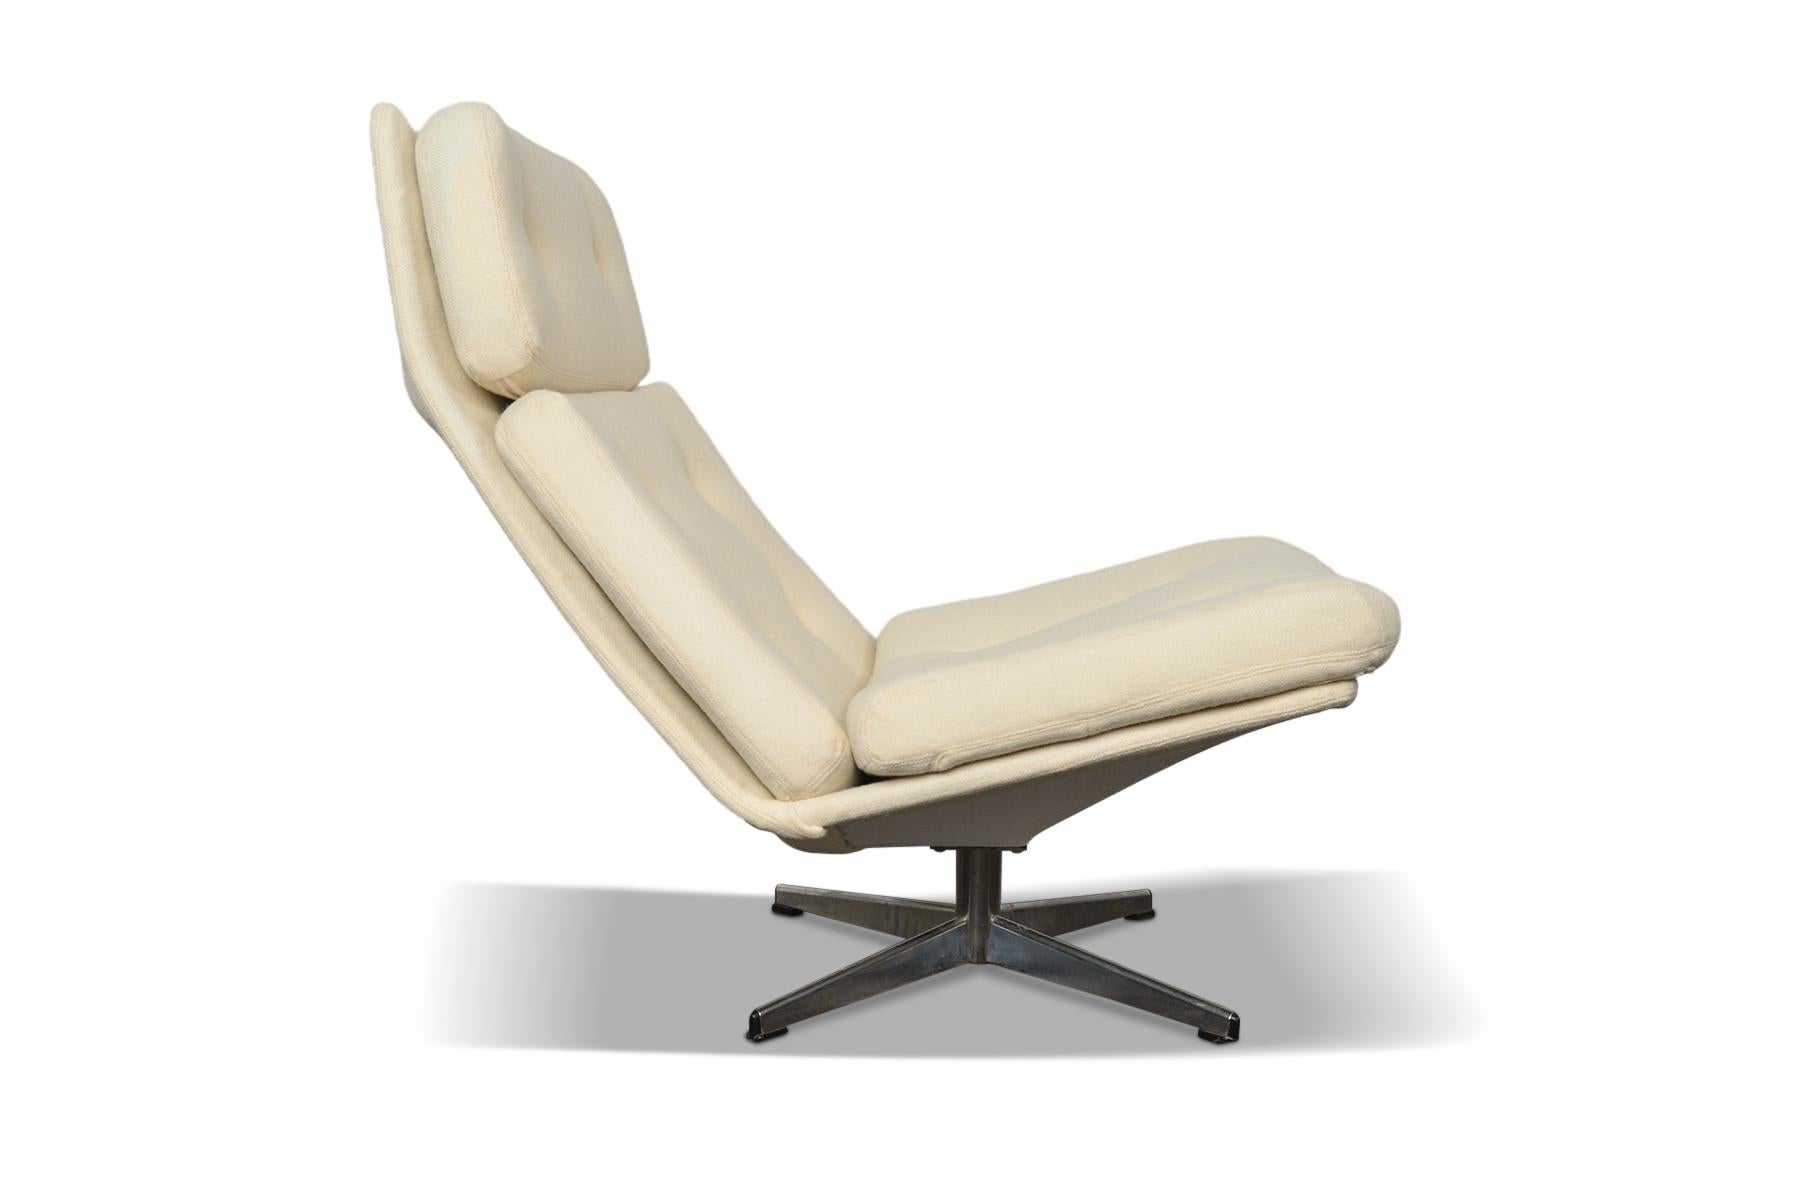 Highback Swivel Lounge Chair by Gillis Lundgren In Excellent Condition For Sale In Berkeley, CA